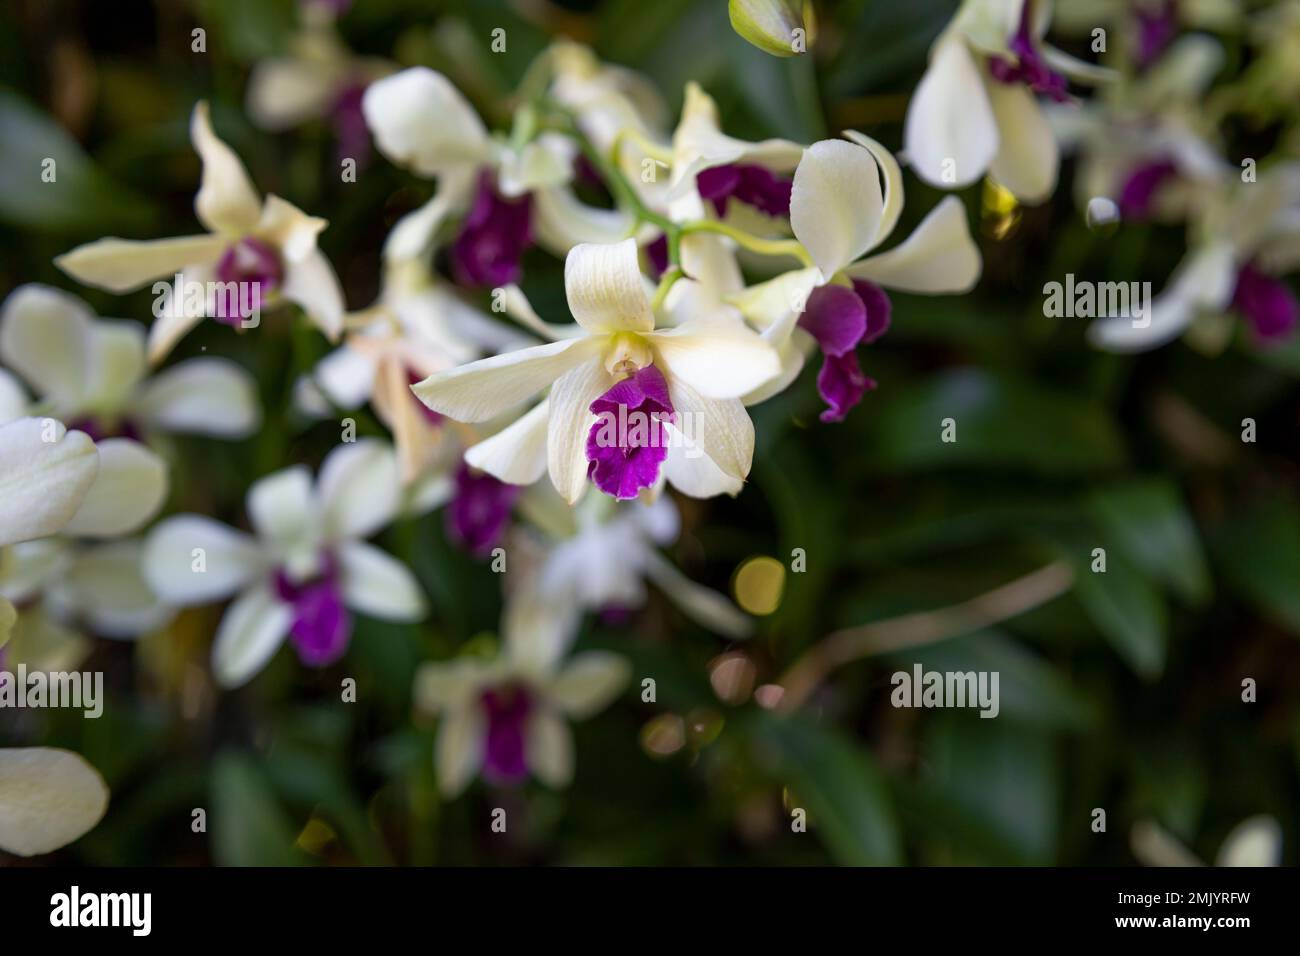 The Dendrobium noble, a specie of orchid commonly known as the nobile dendrobium, Purple and white color flower Stock Photo